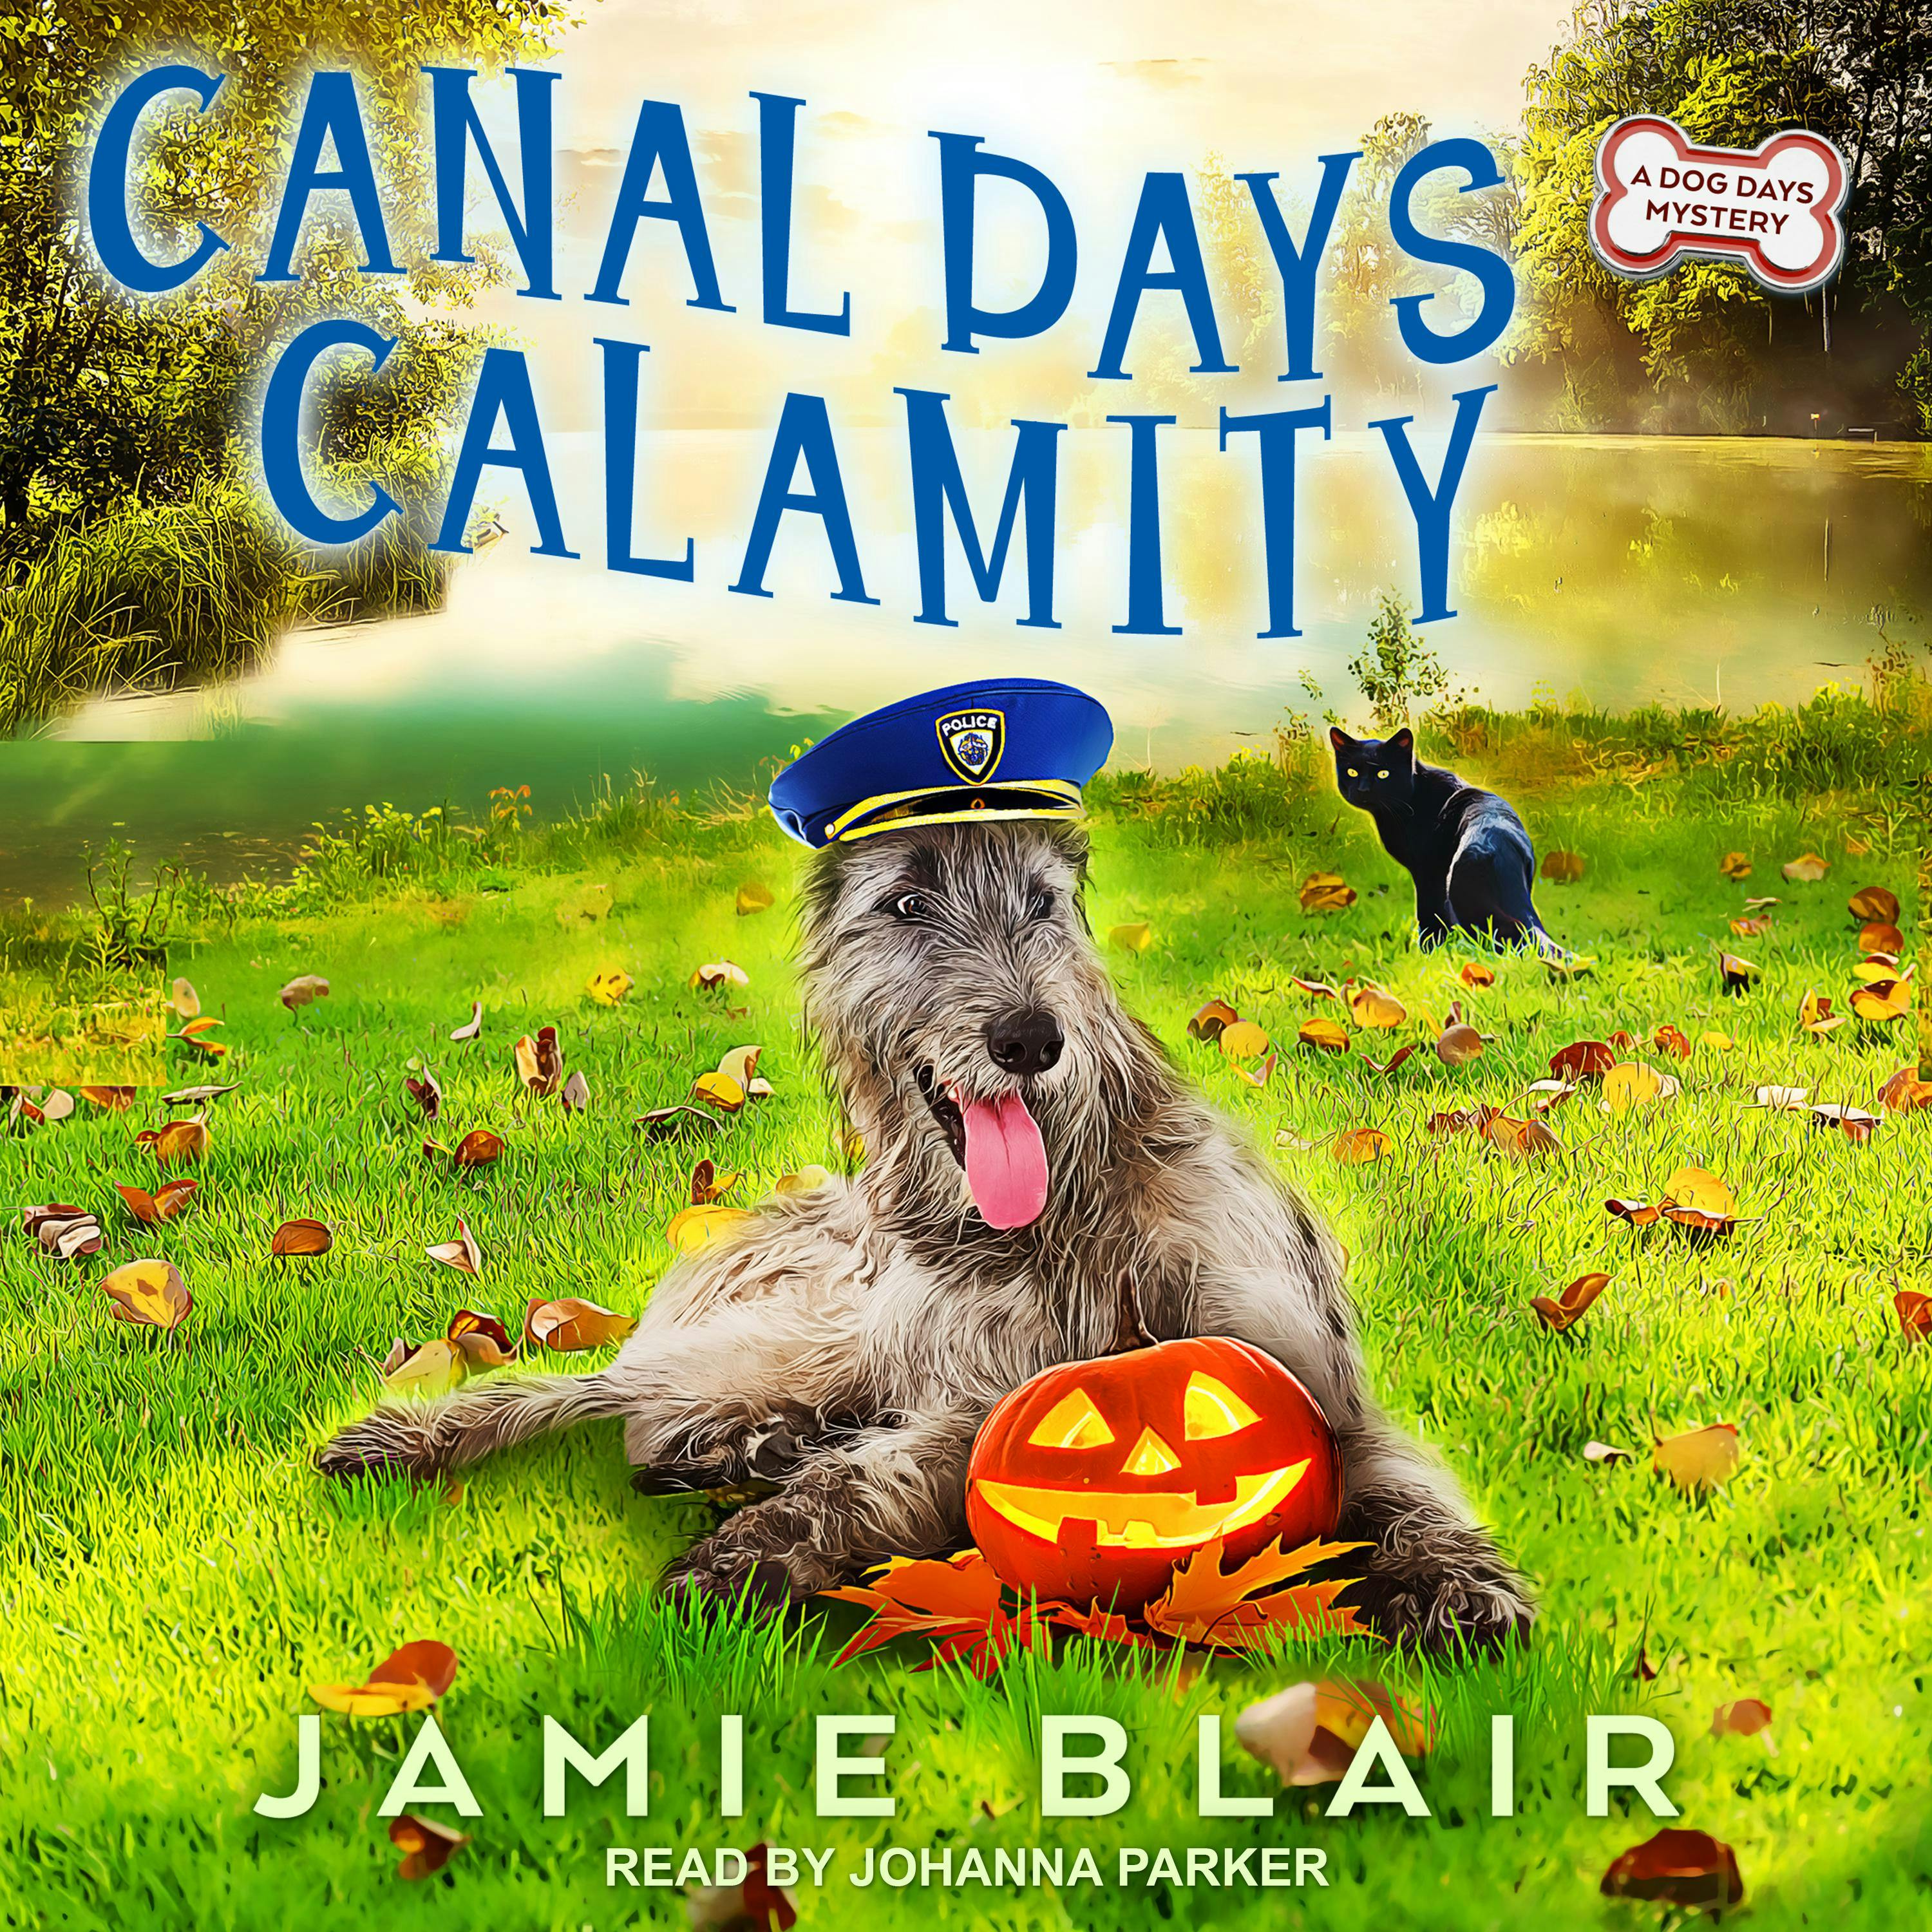 Canal Days Calamity: A Dog Days Mystery - undefined